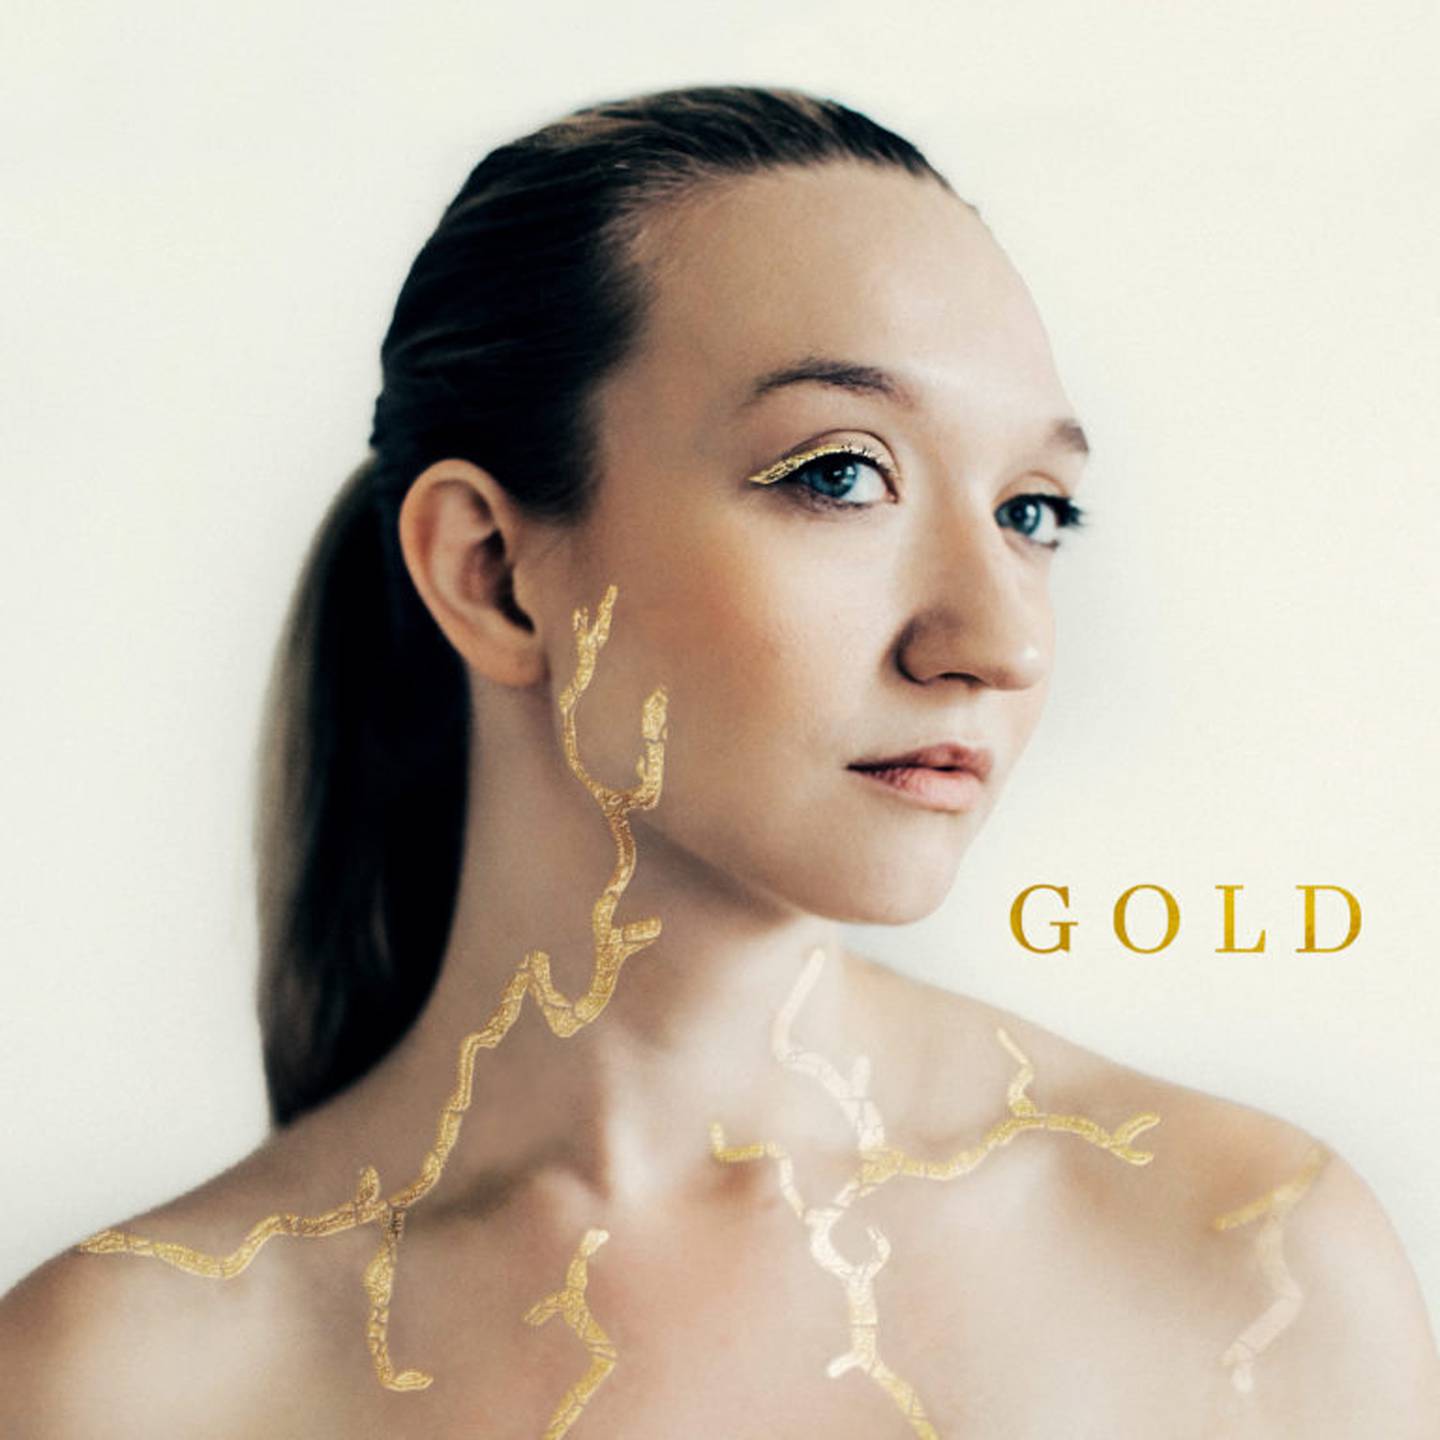 "Gold" Emily Anderson